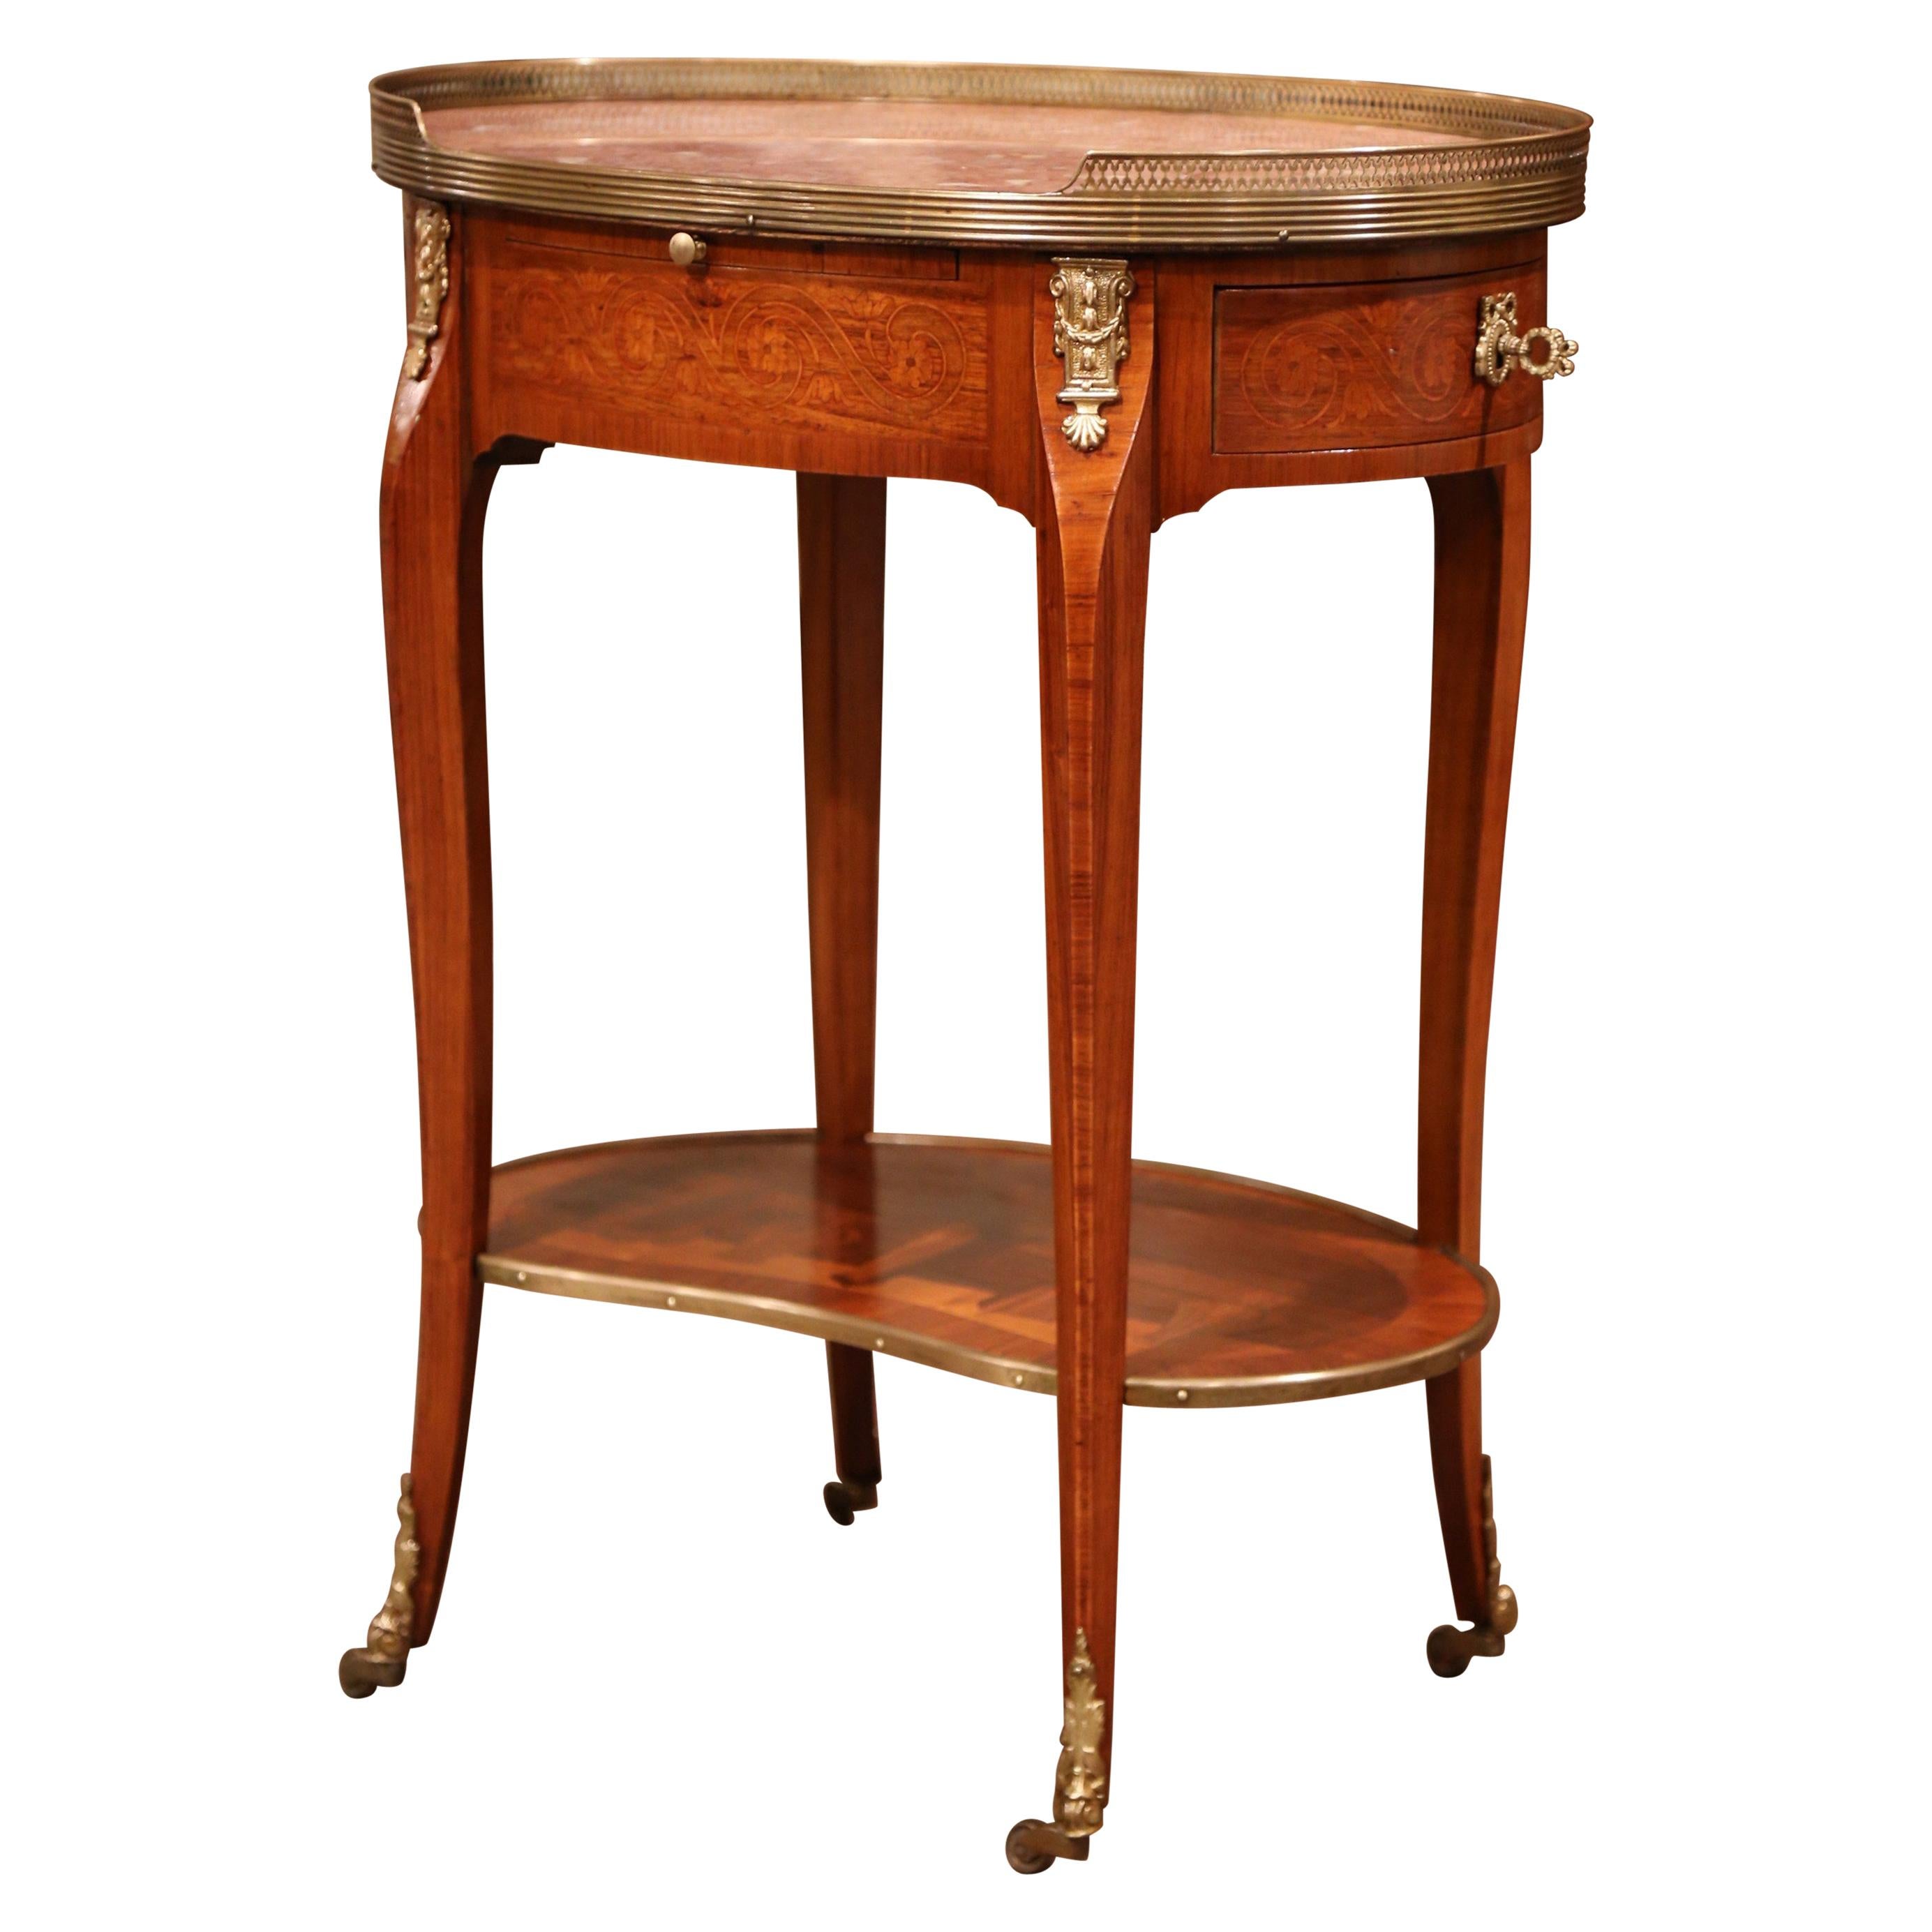 Mid-20th Century French Marquetry Cherry and Brass Side Table with Marble Top